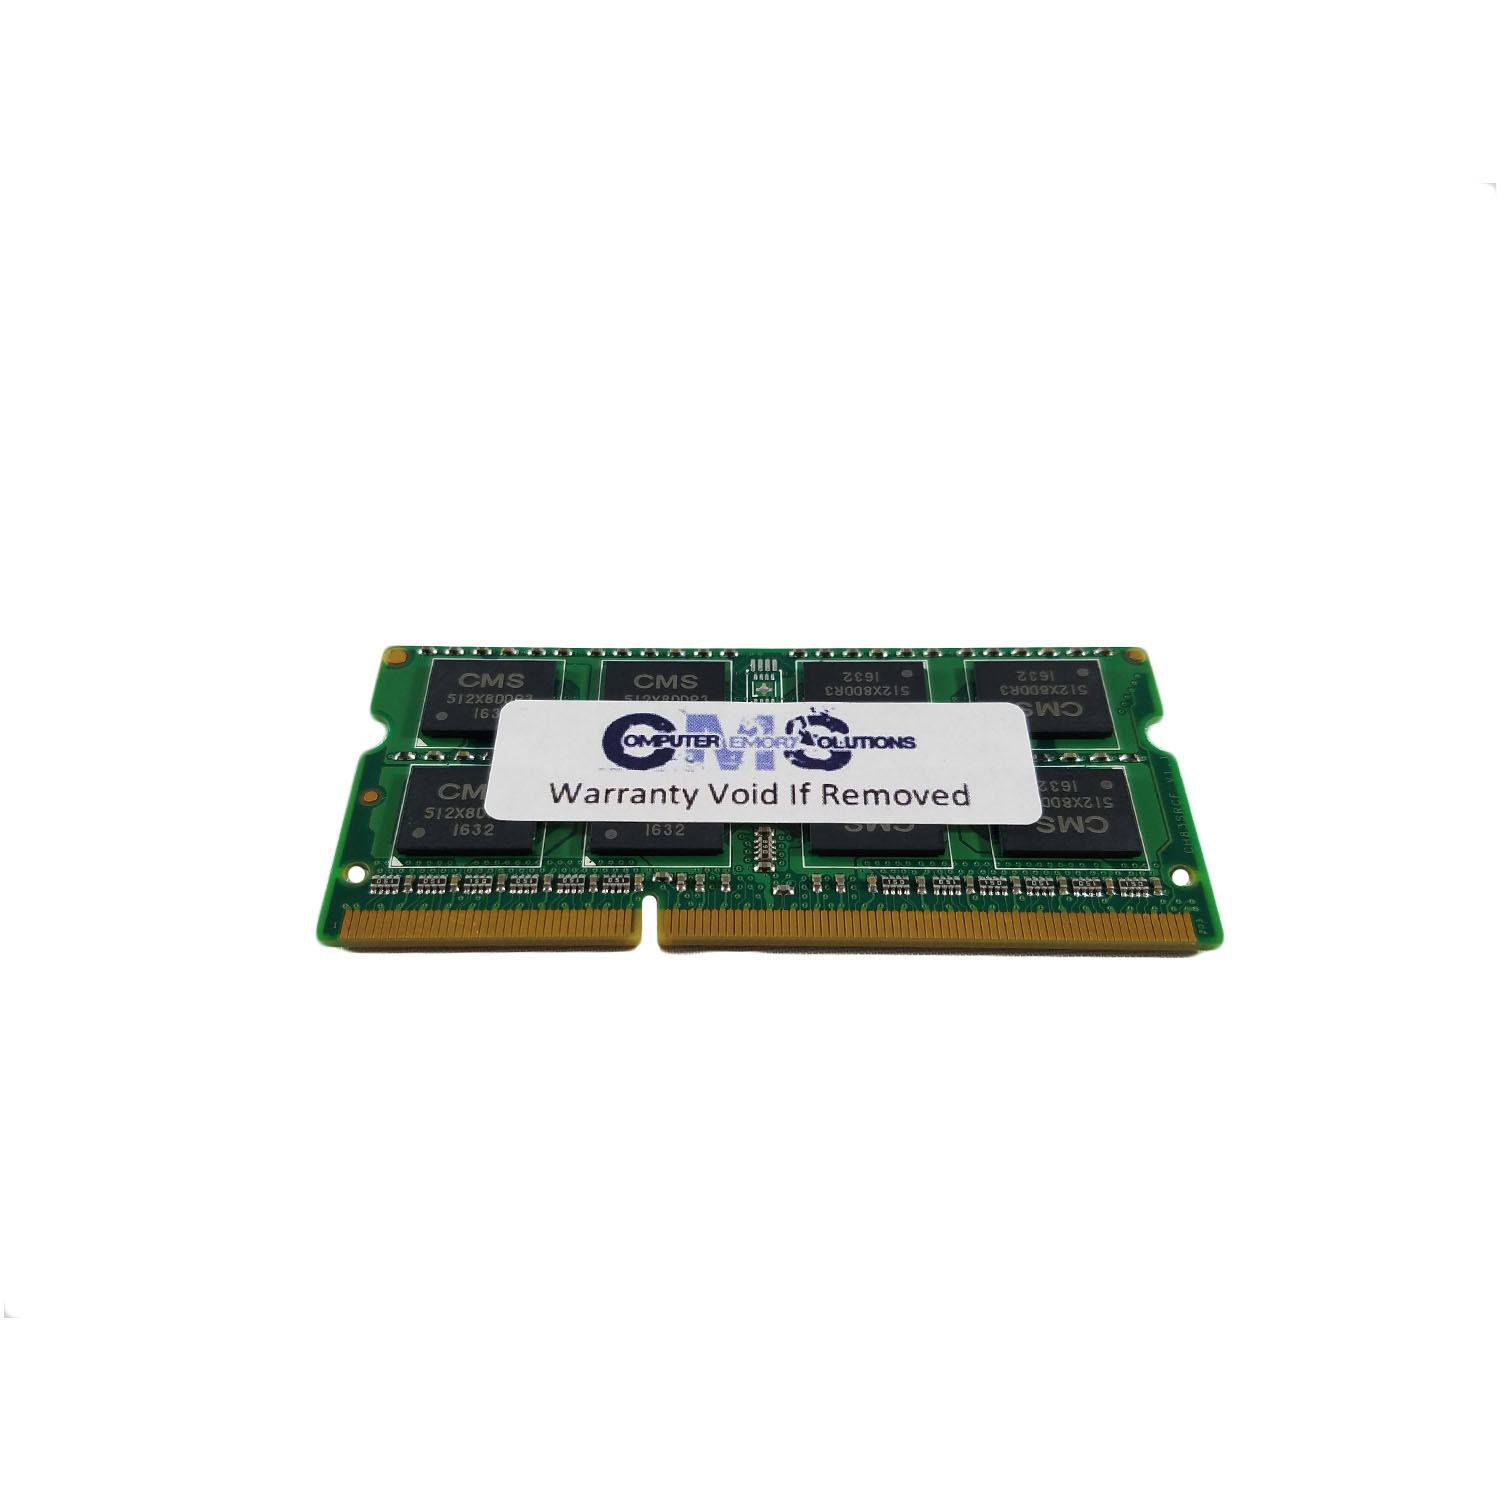 CMS 4GB (1X4GB) DDR3 8500 1066MHZ NON ECC SODIMM Memory Ram Upgrade Compatible with Asrock® Mini Pc Vision 3D 137B, Pc Vision 3D 137D - A34 - image 2 of 2